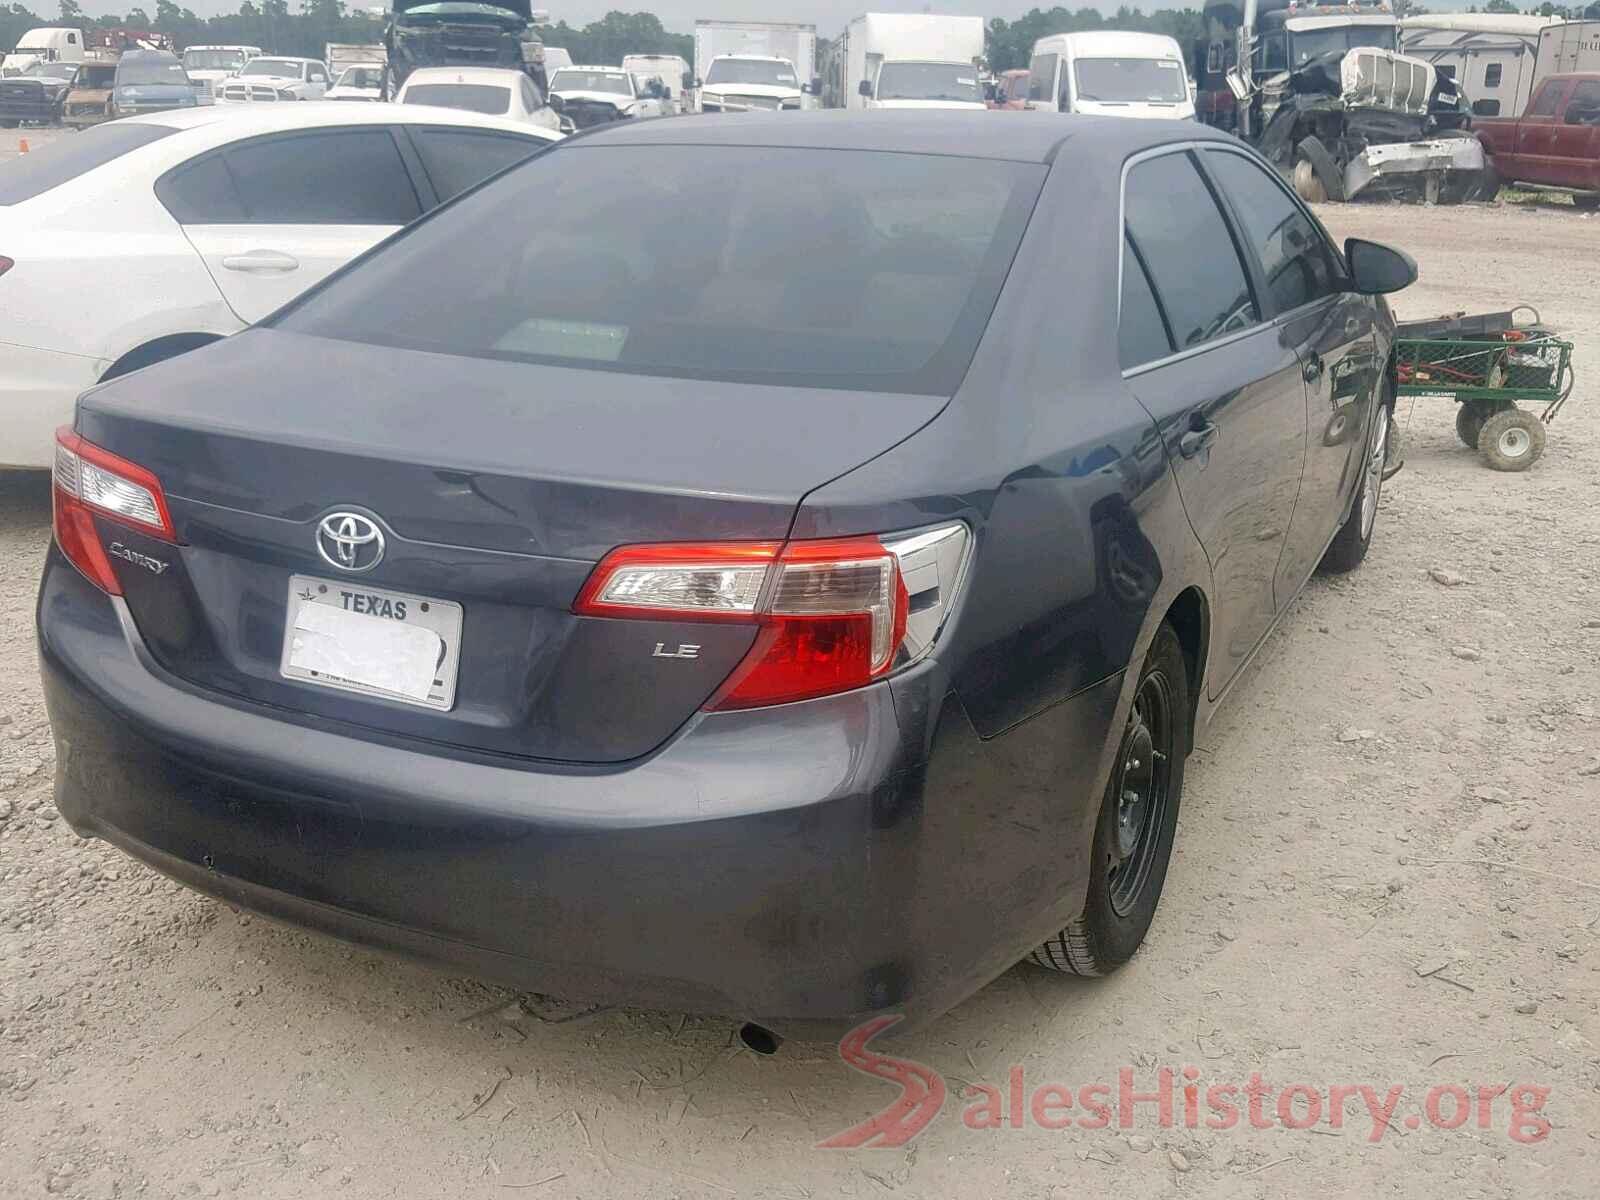 4T4BF1FKXCR266730 2012 TOYOTA CAMRY BASE